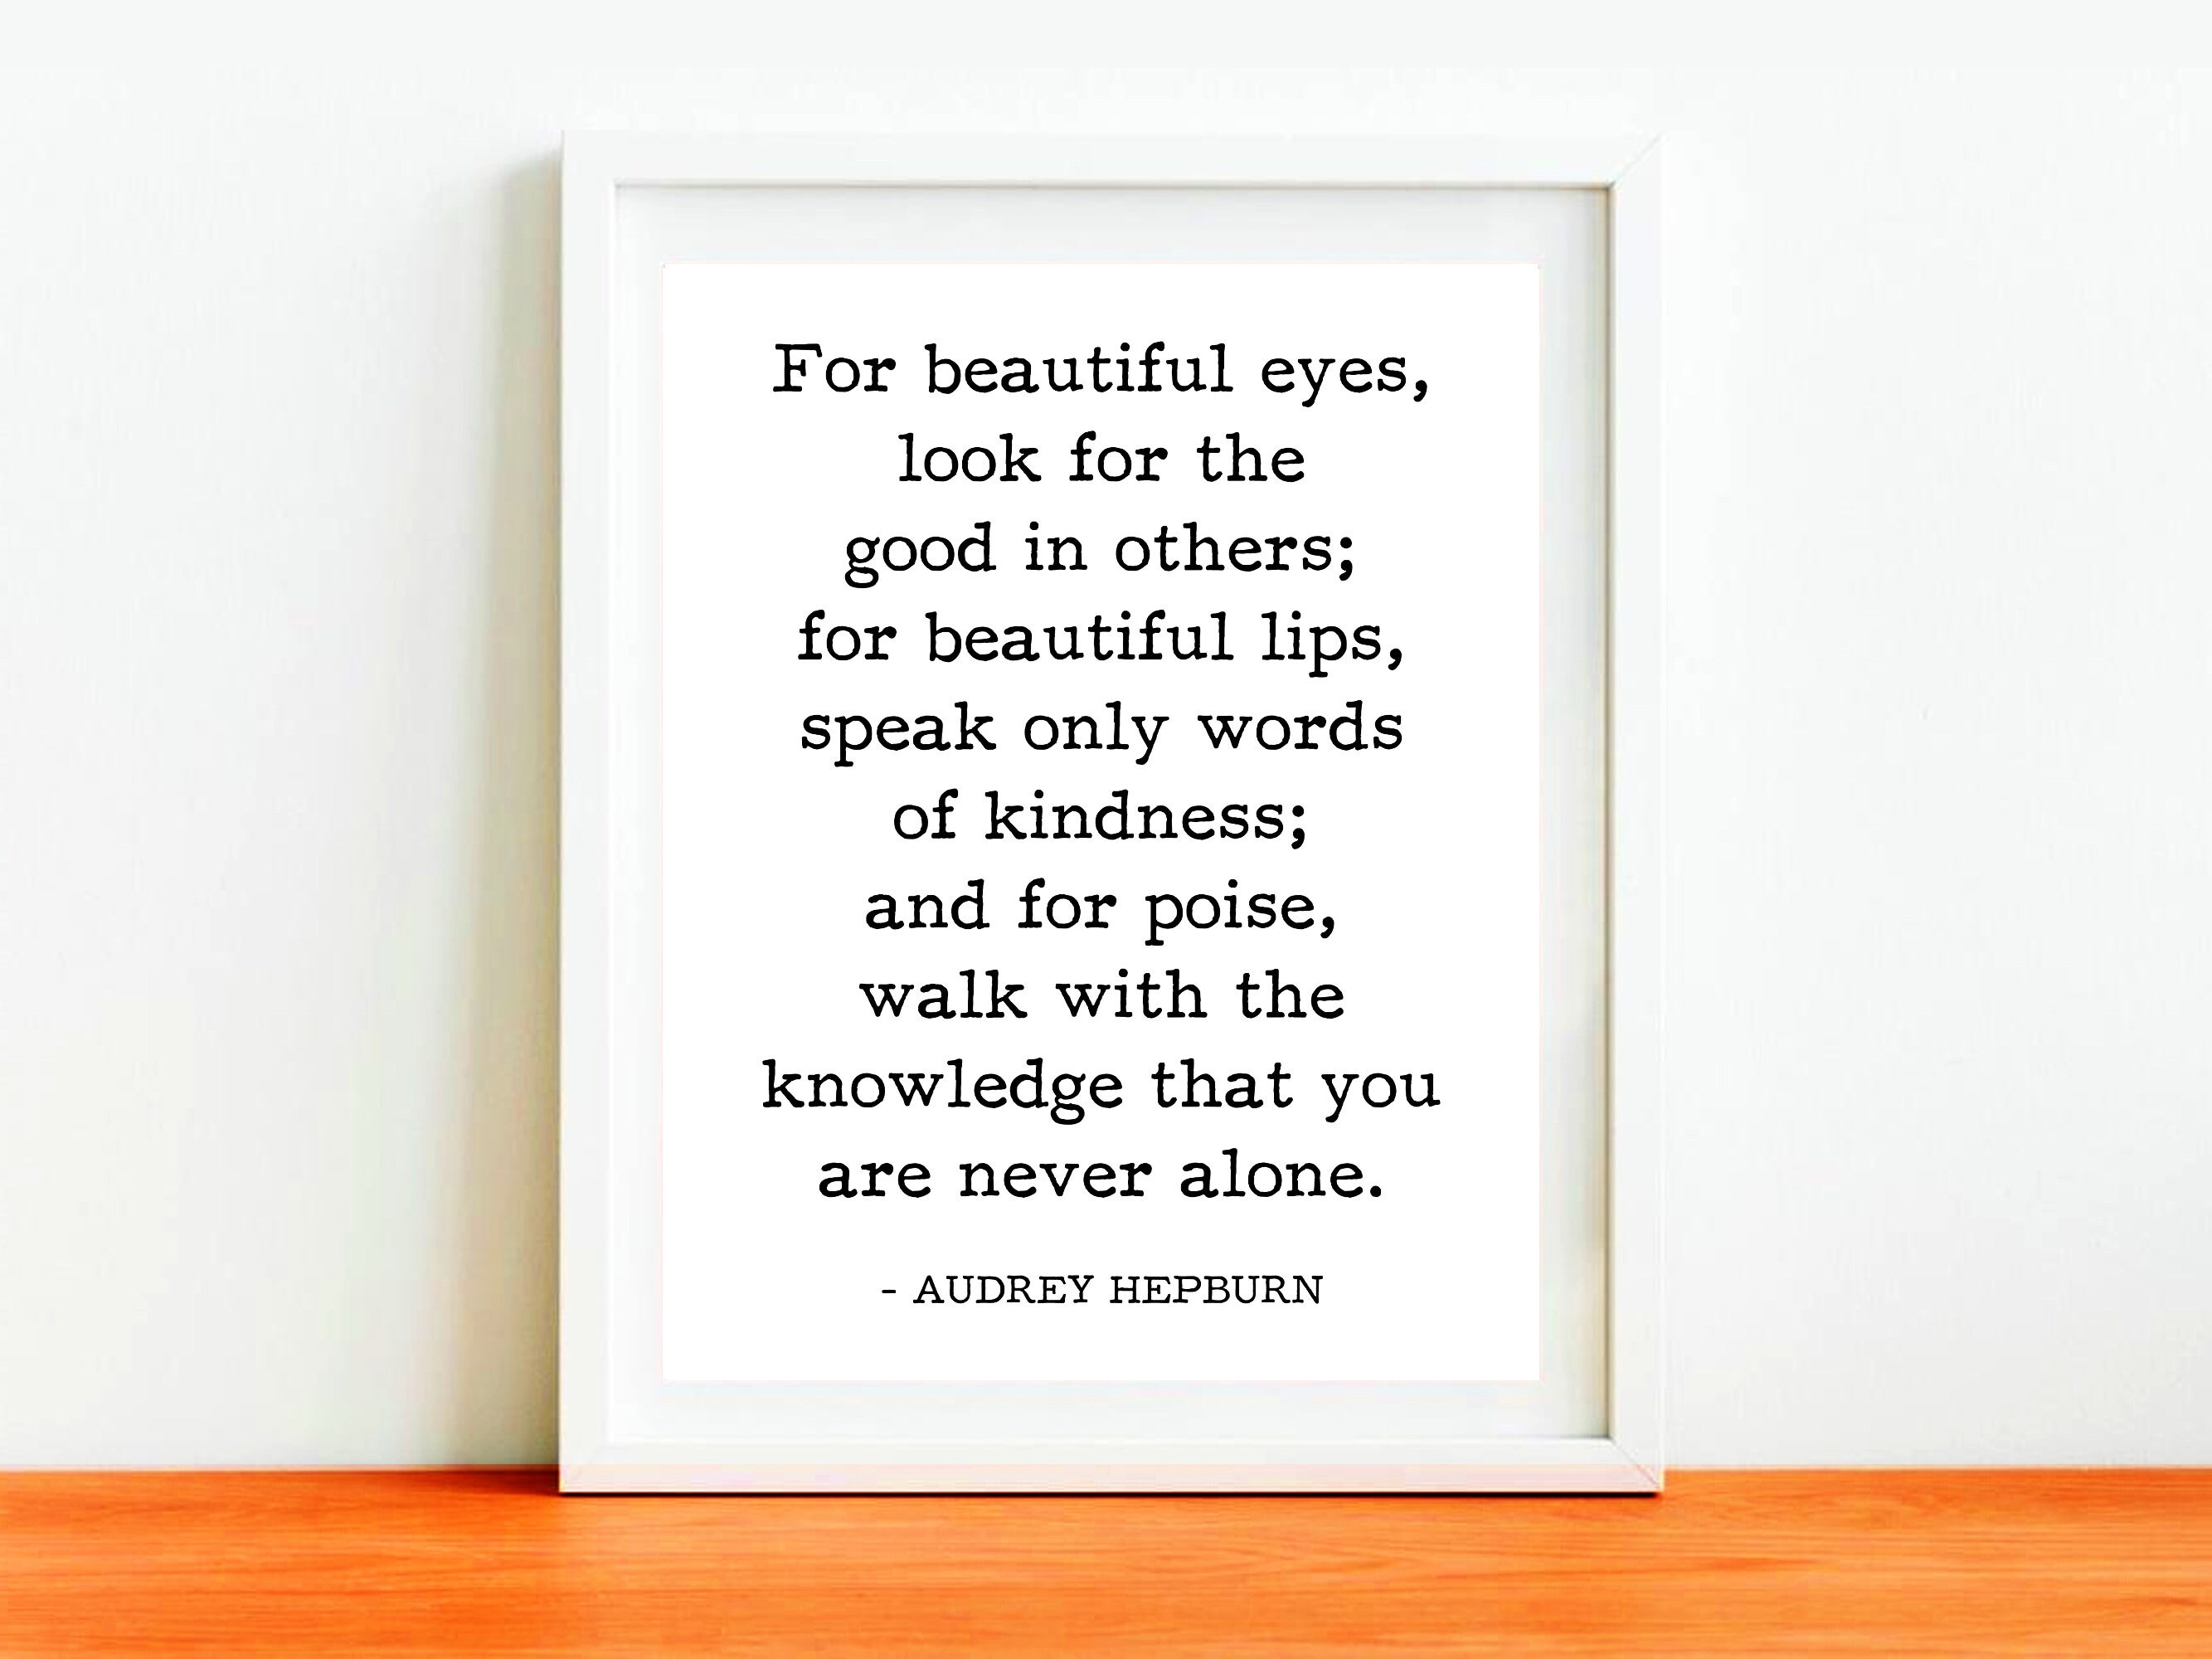 Search Quotes - For beautiful eyes look for the good in others; for  beautiful lips, speak only words of kindness; and for poise, walk with the  knowledge that you are never alone.